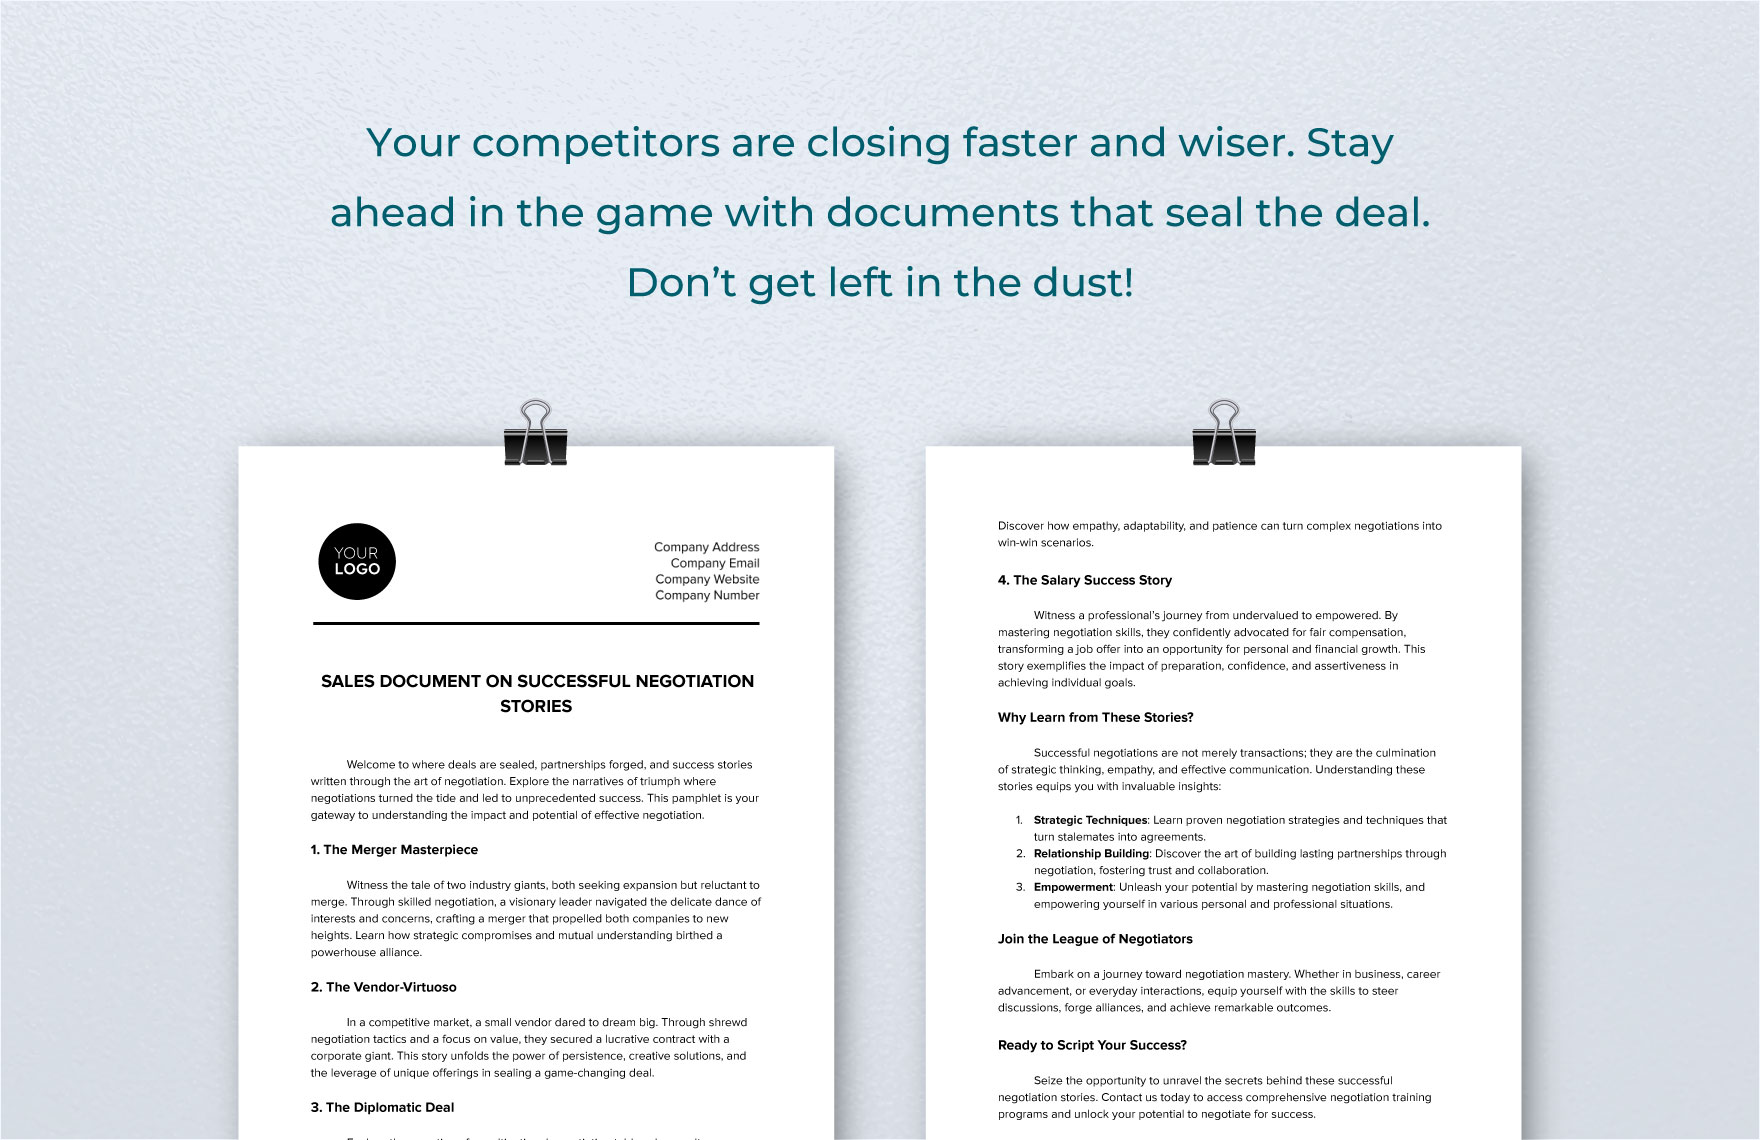 Sales Document on Successful Negotiation Stories Template